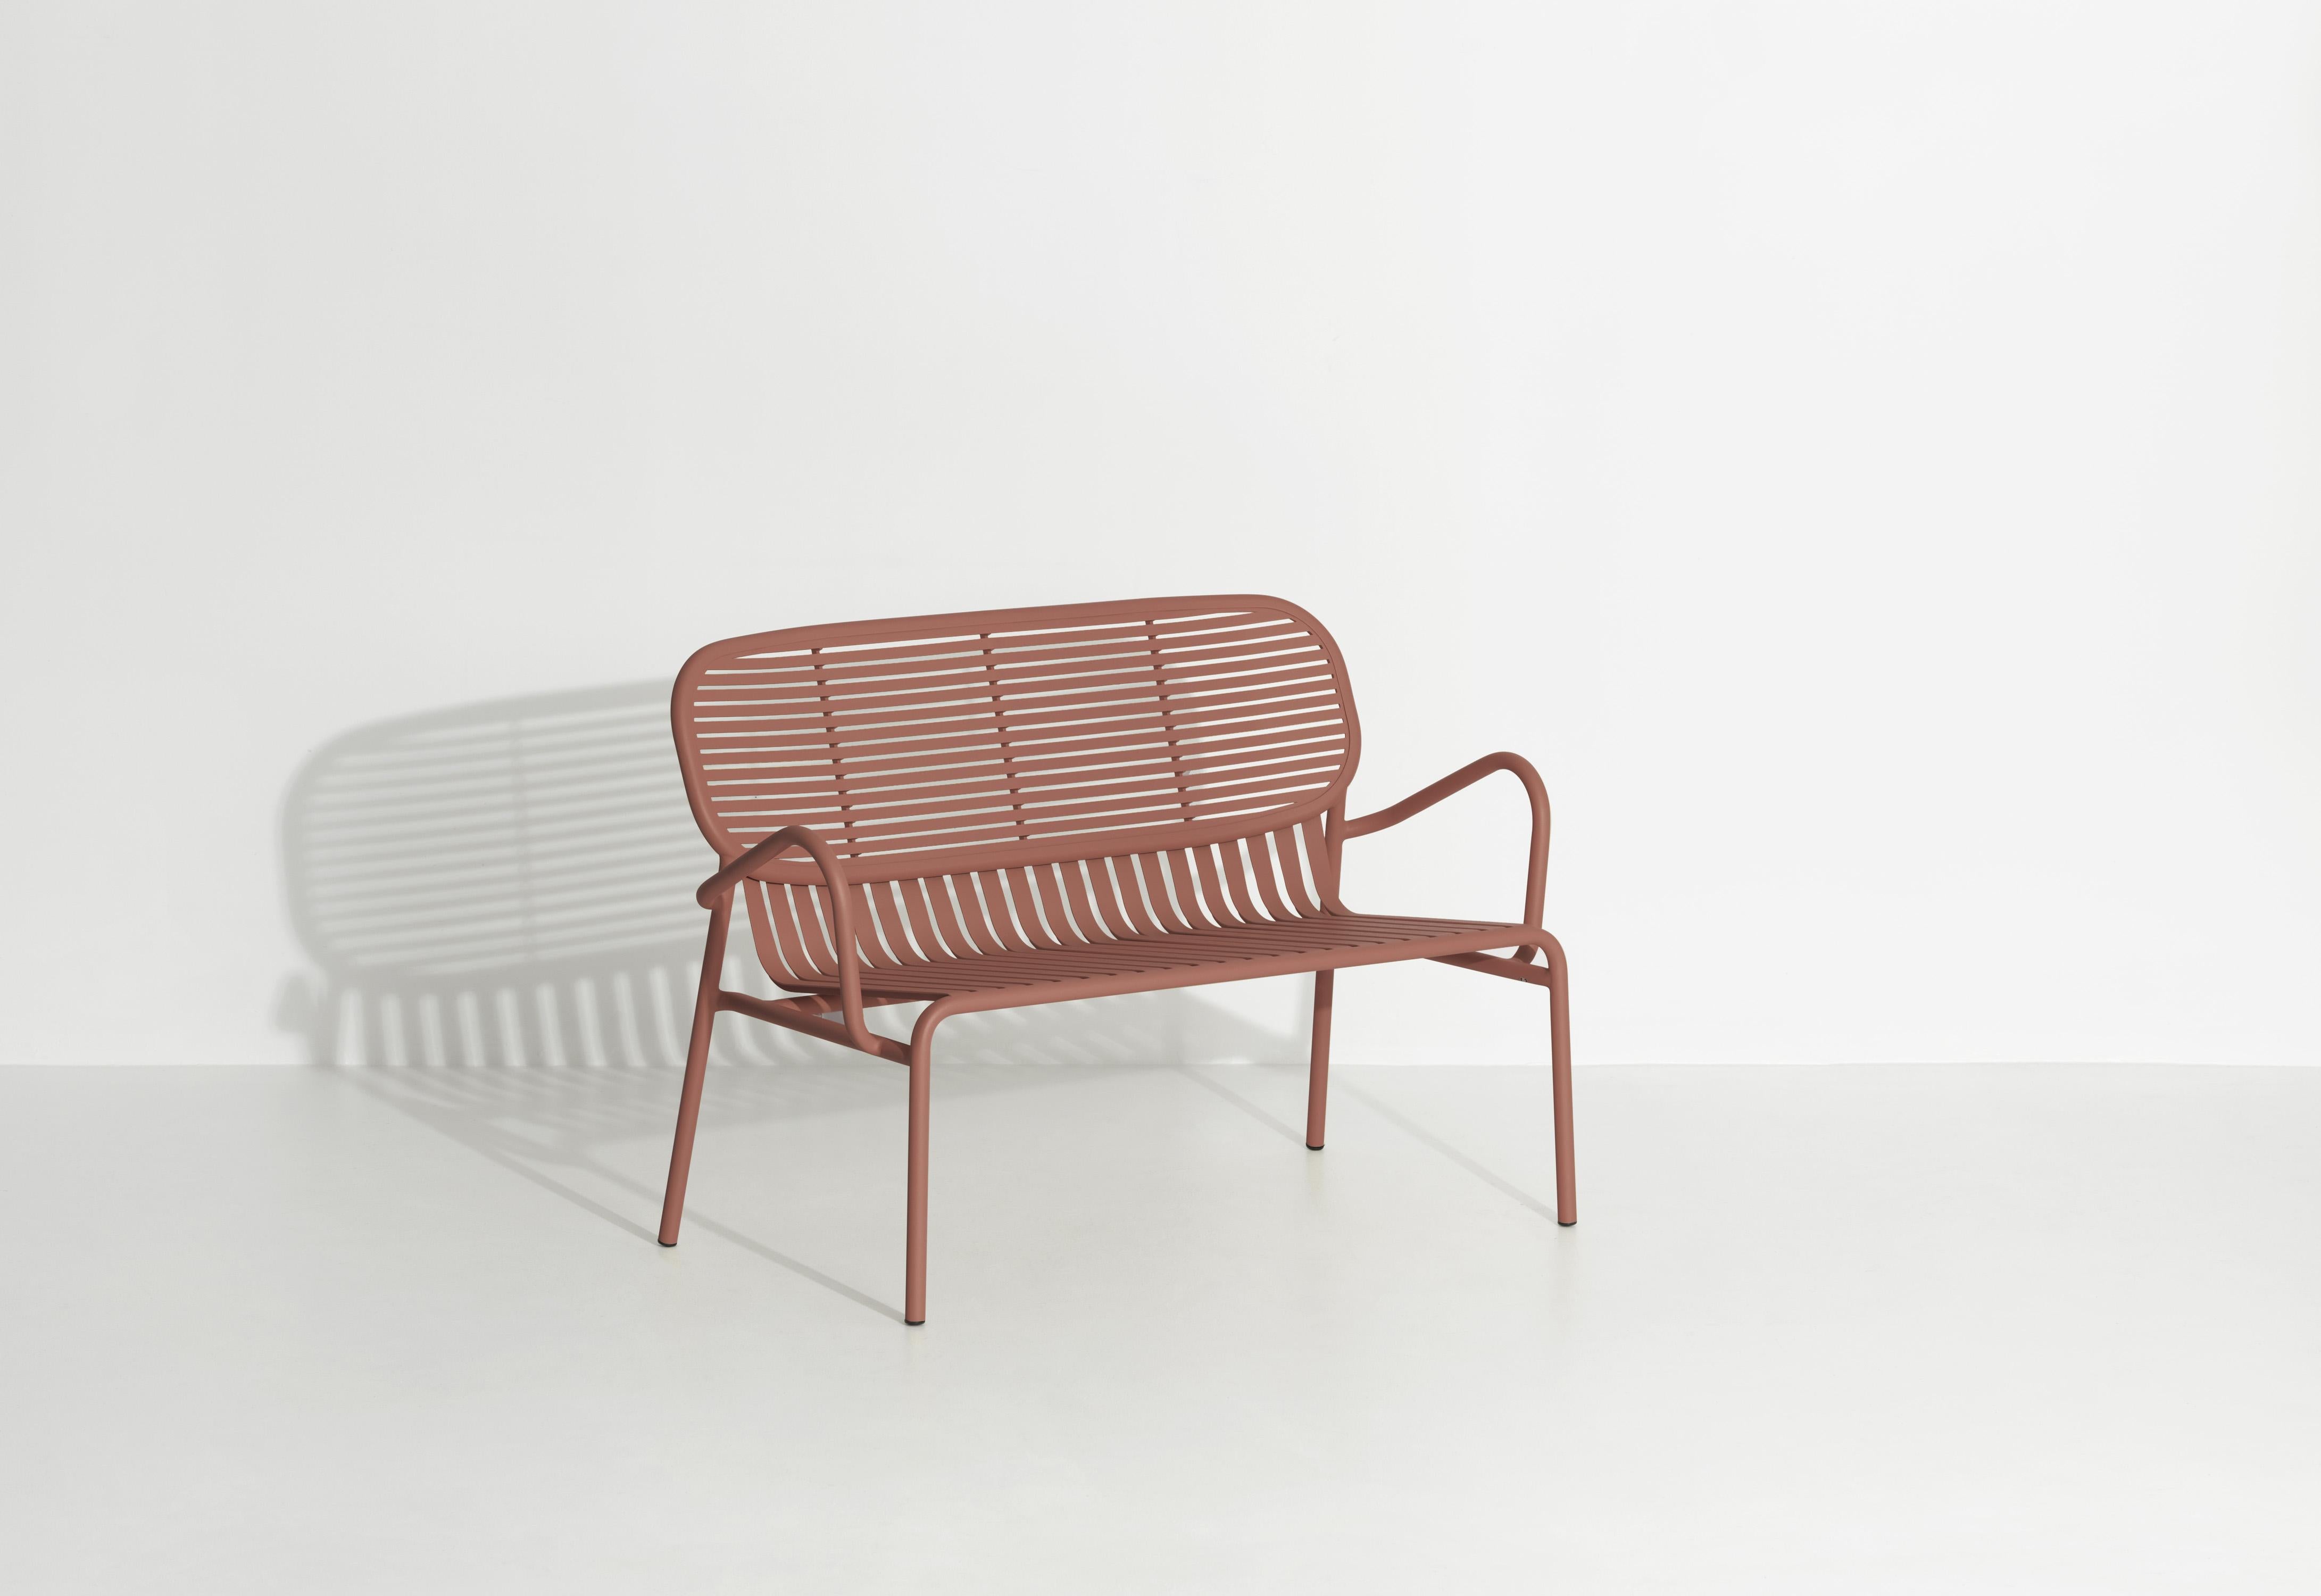 Petite Friture Week-End Sofa in Terracotta Aluminium by Studio BrichetZiegler In New Condition For Sale In Brooklyn, NY